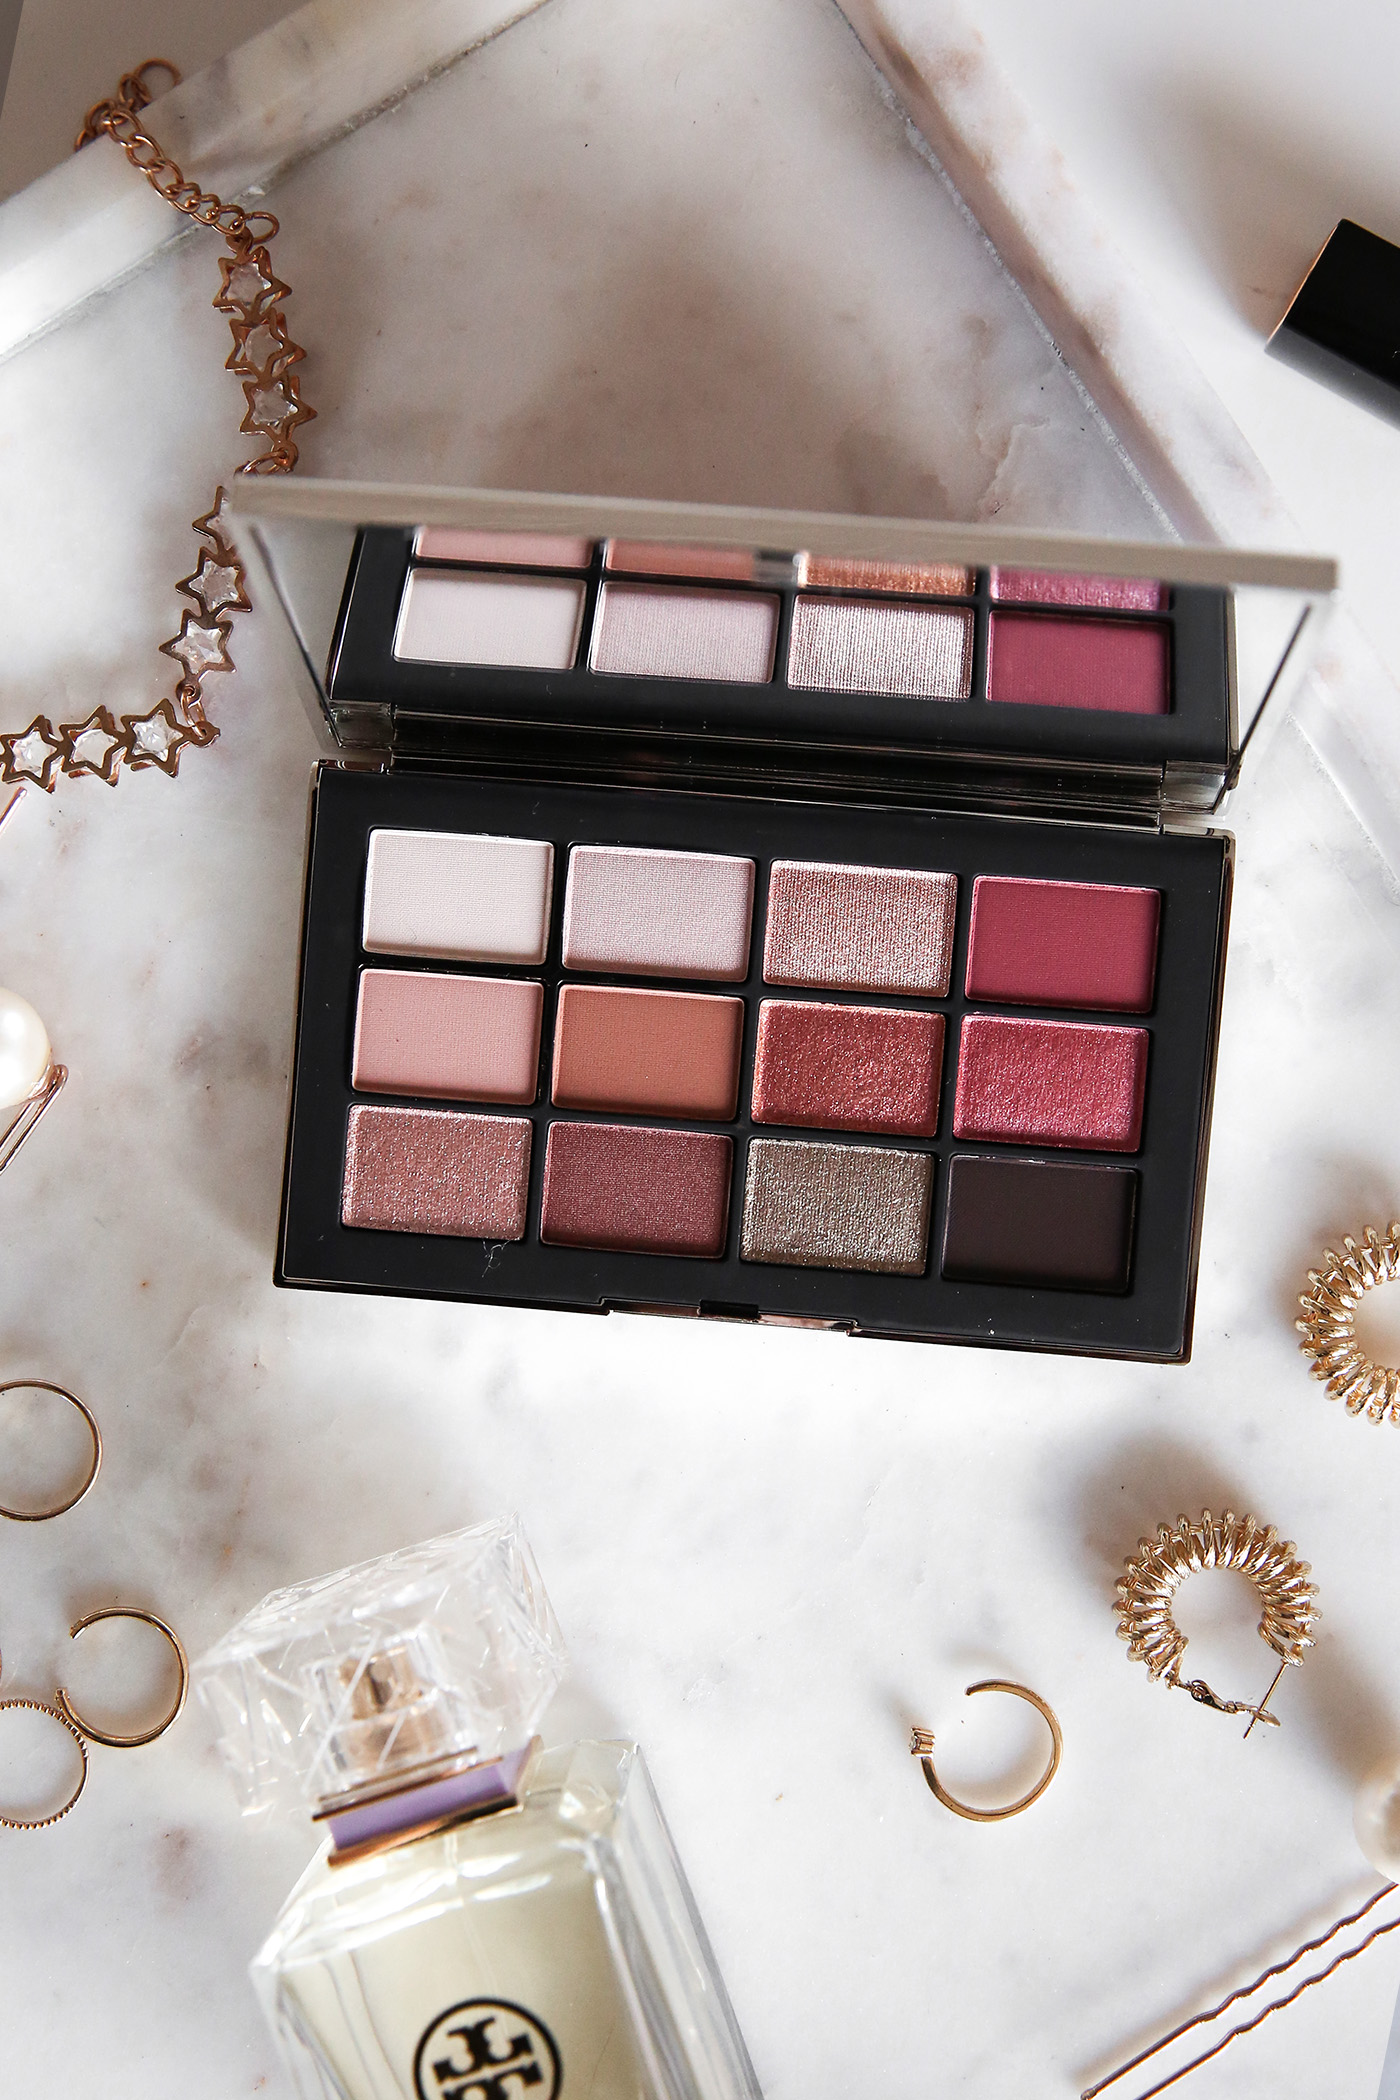 NARS NARSissist Wanted Eyeshadow Palette Review